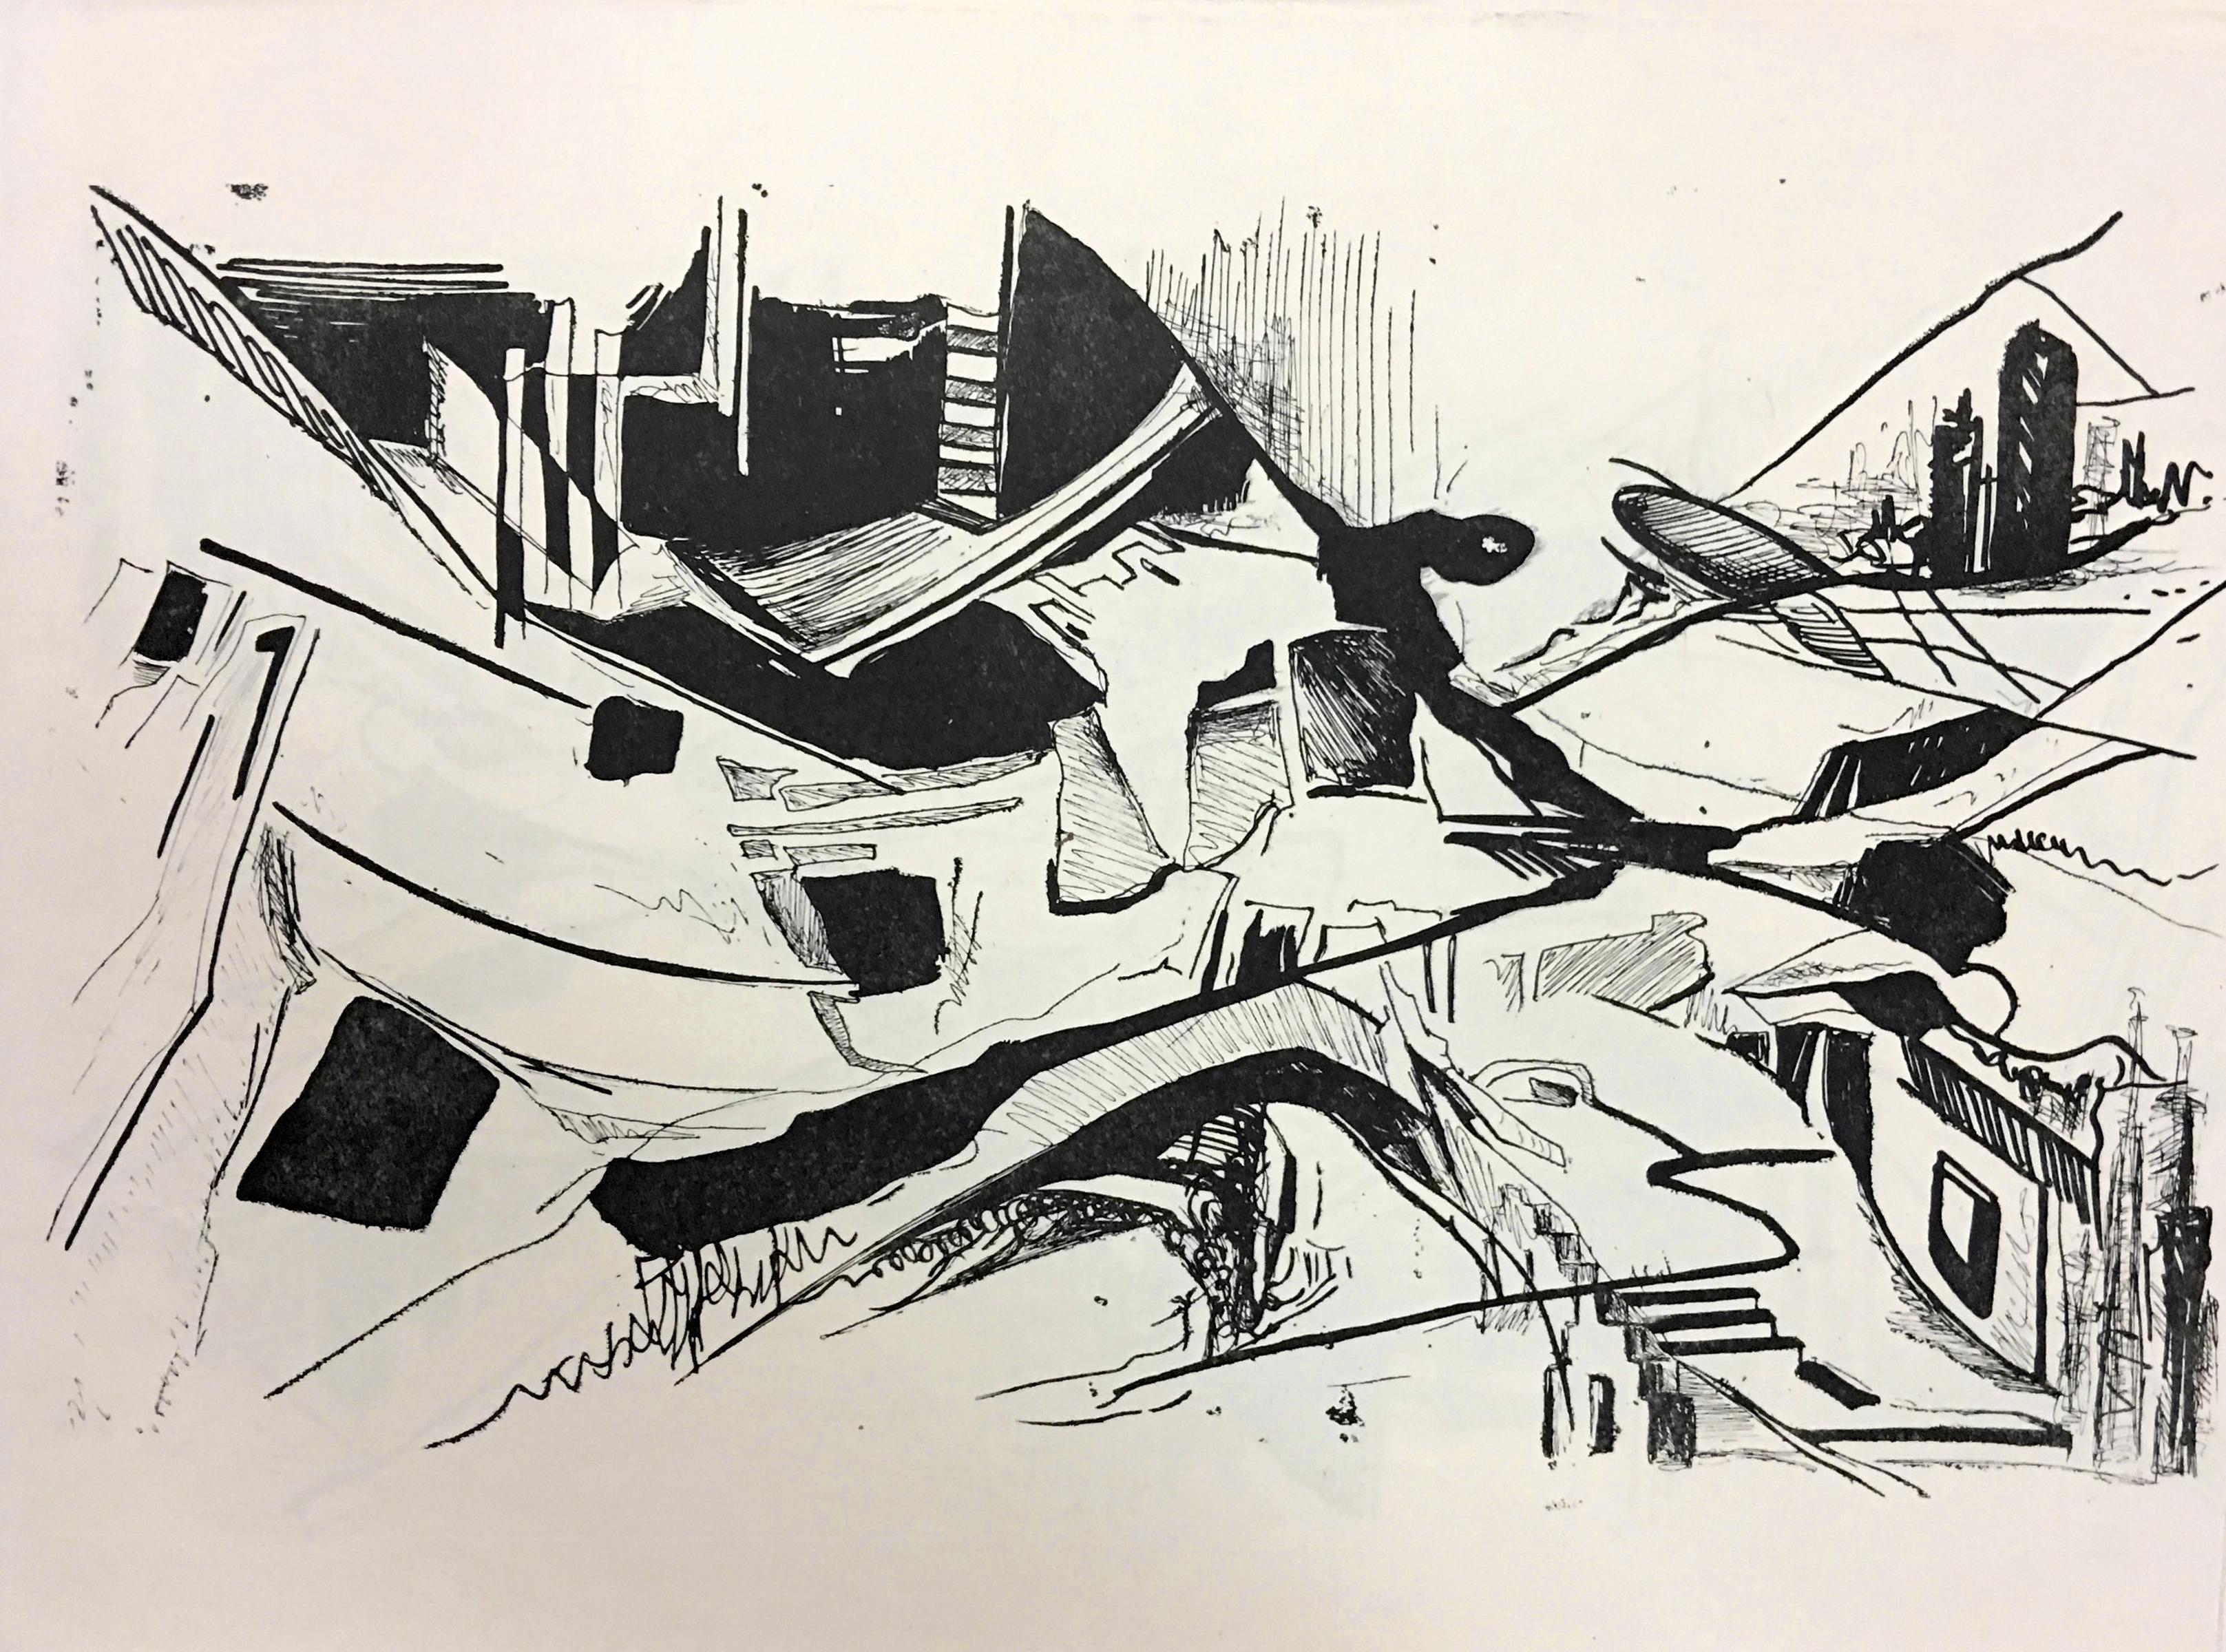 Zahra Nazari Abstract Print - “Journey” in black and white with graphic drawing depicts an aerial city view